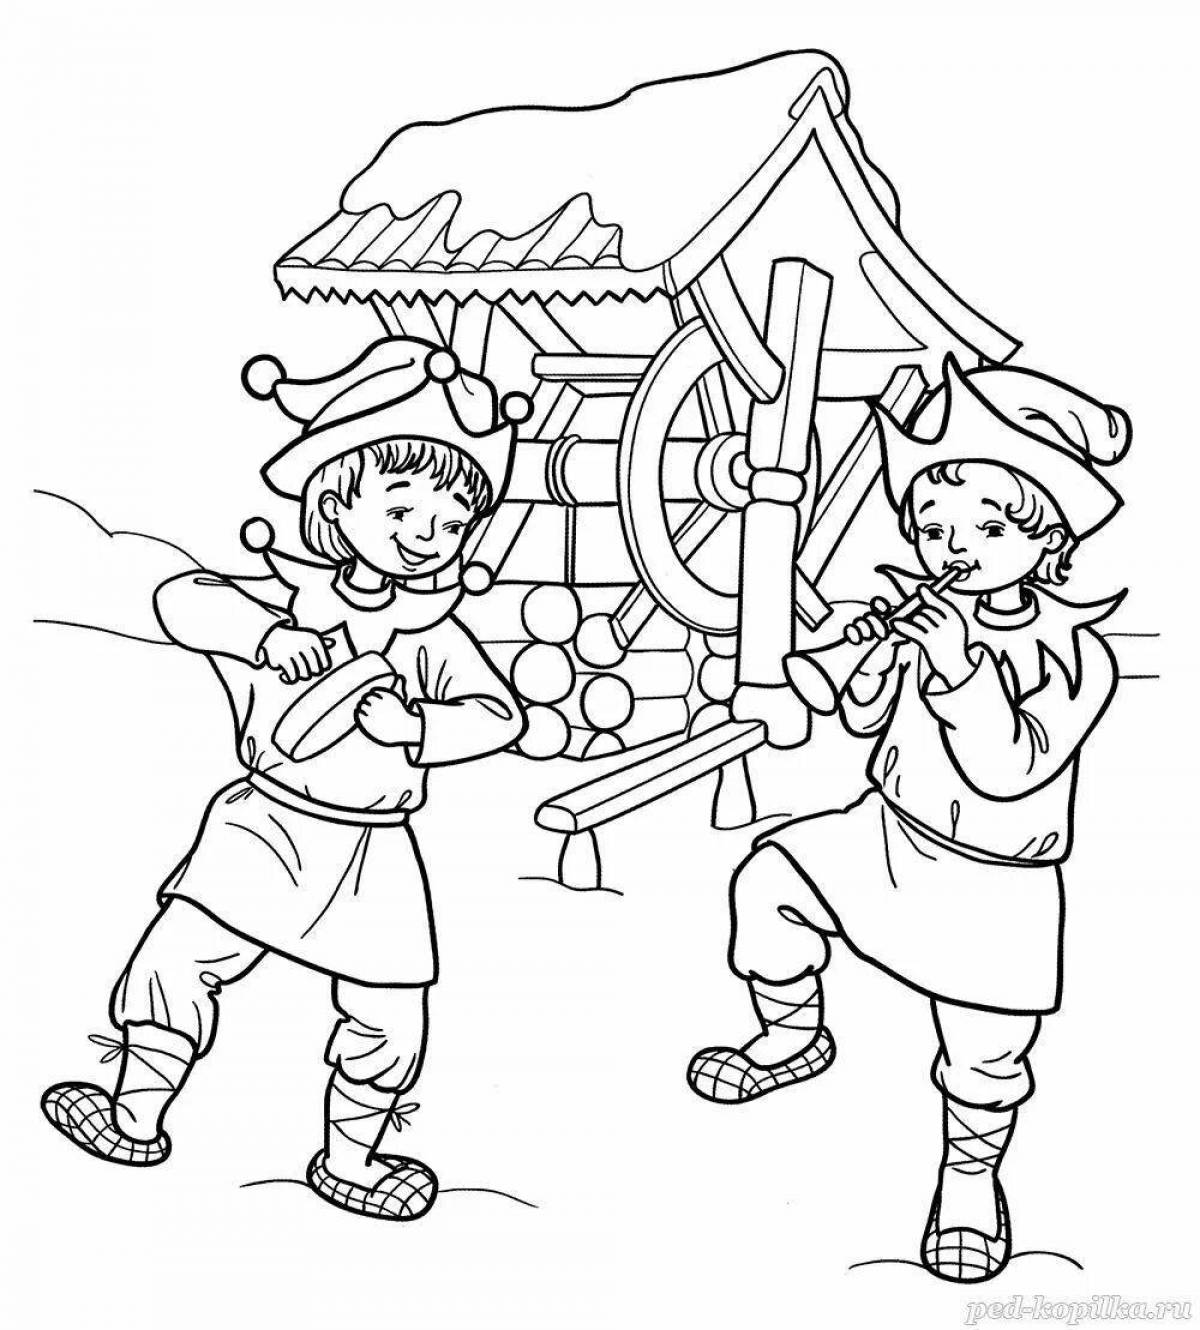 Crazy carol coloring pages for kids 5-6 years old